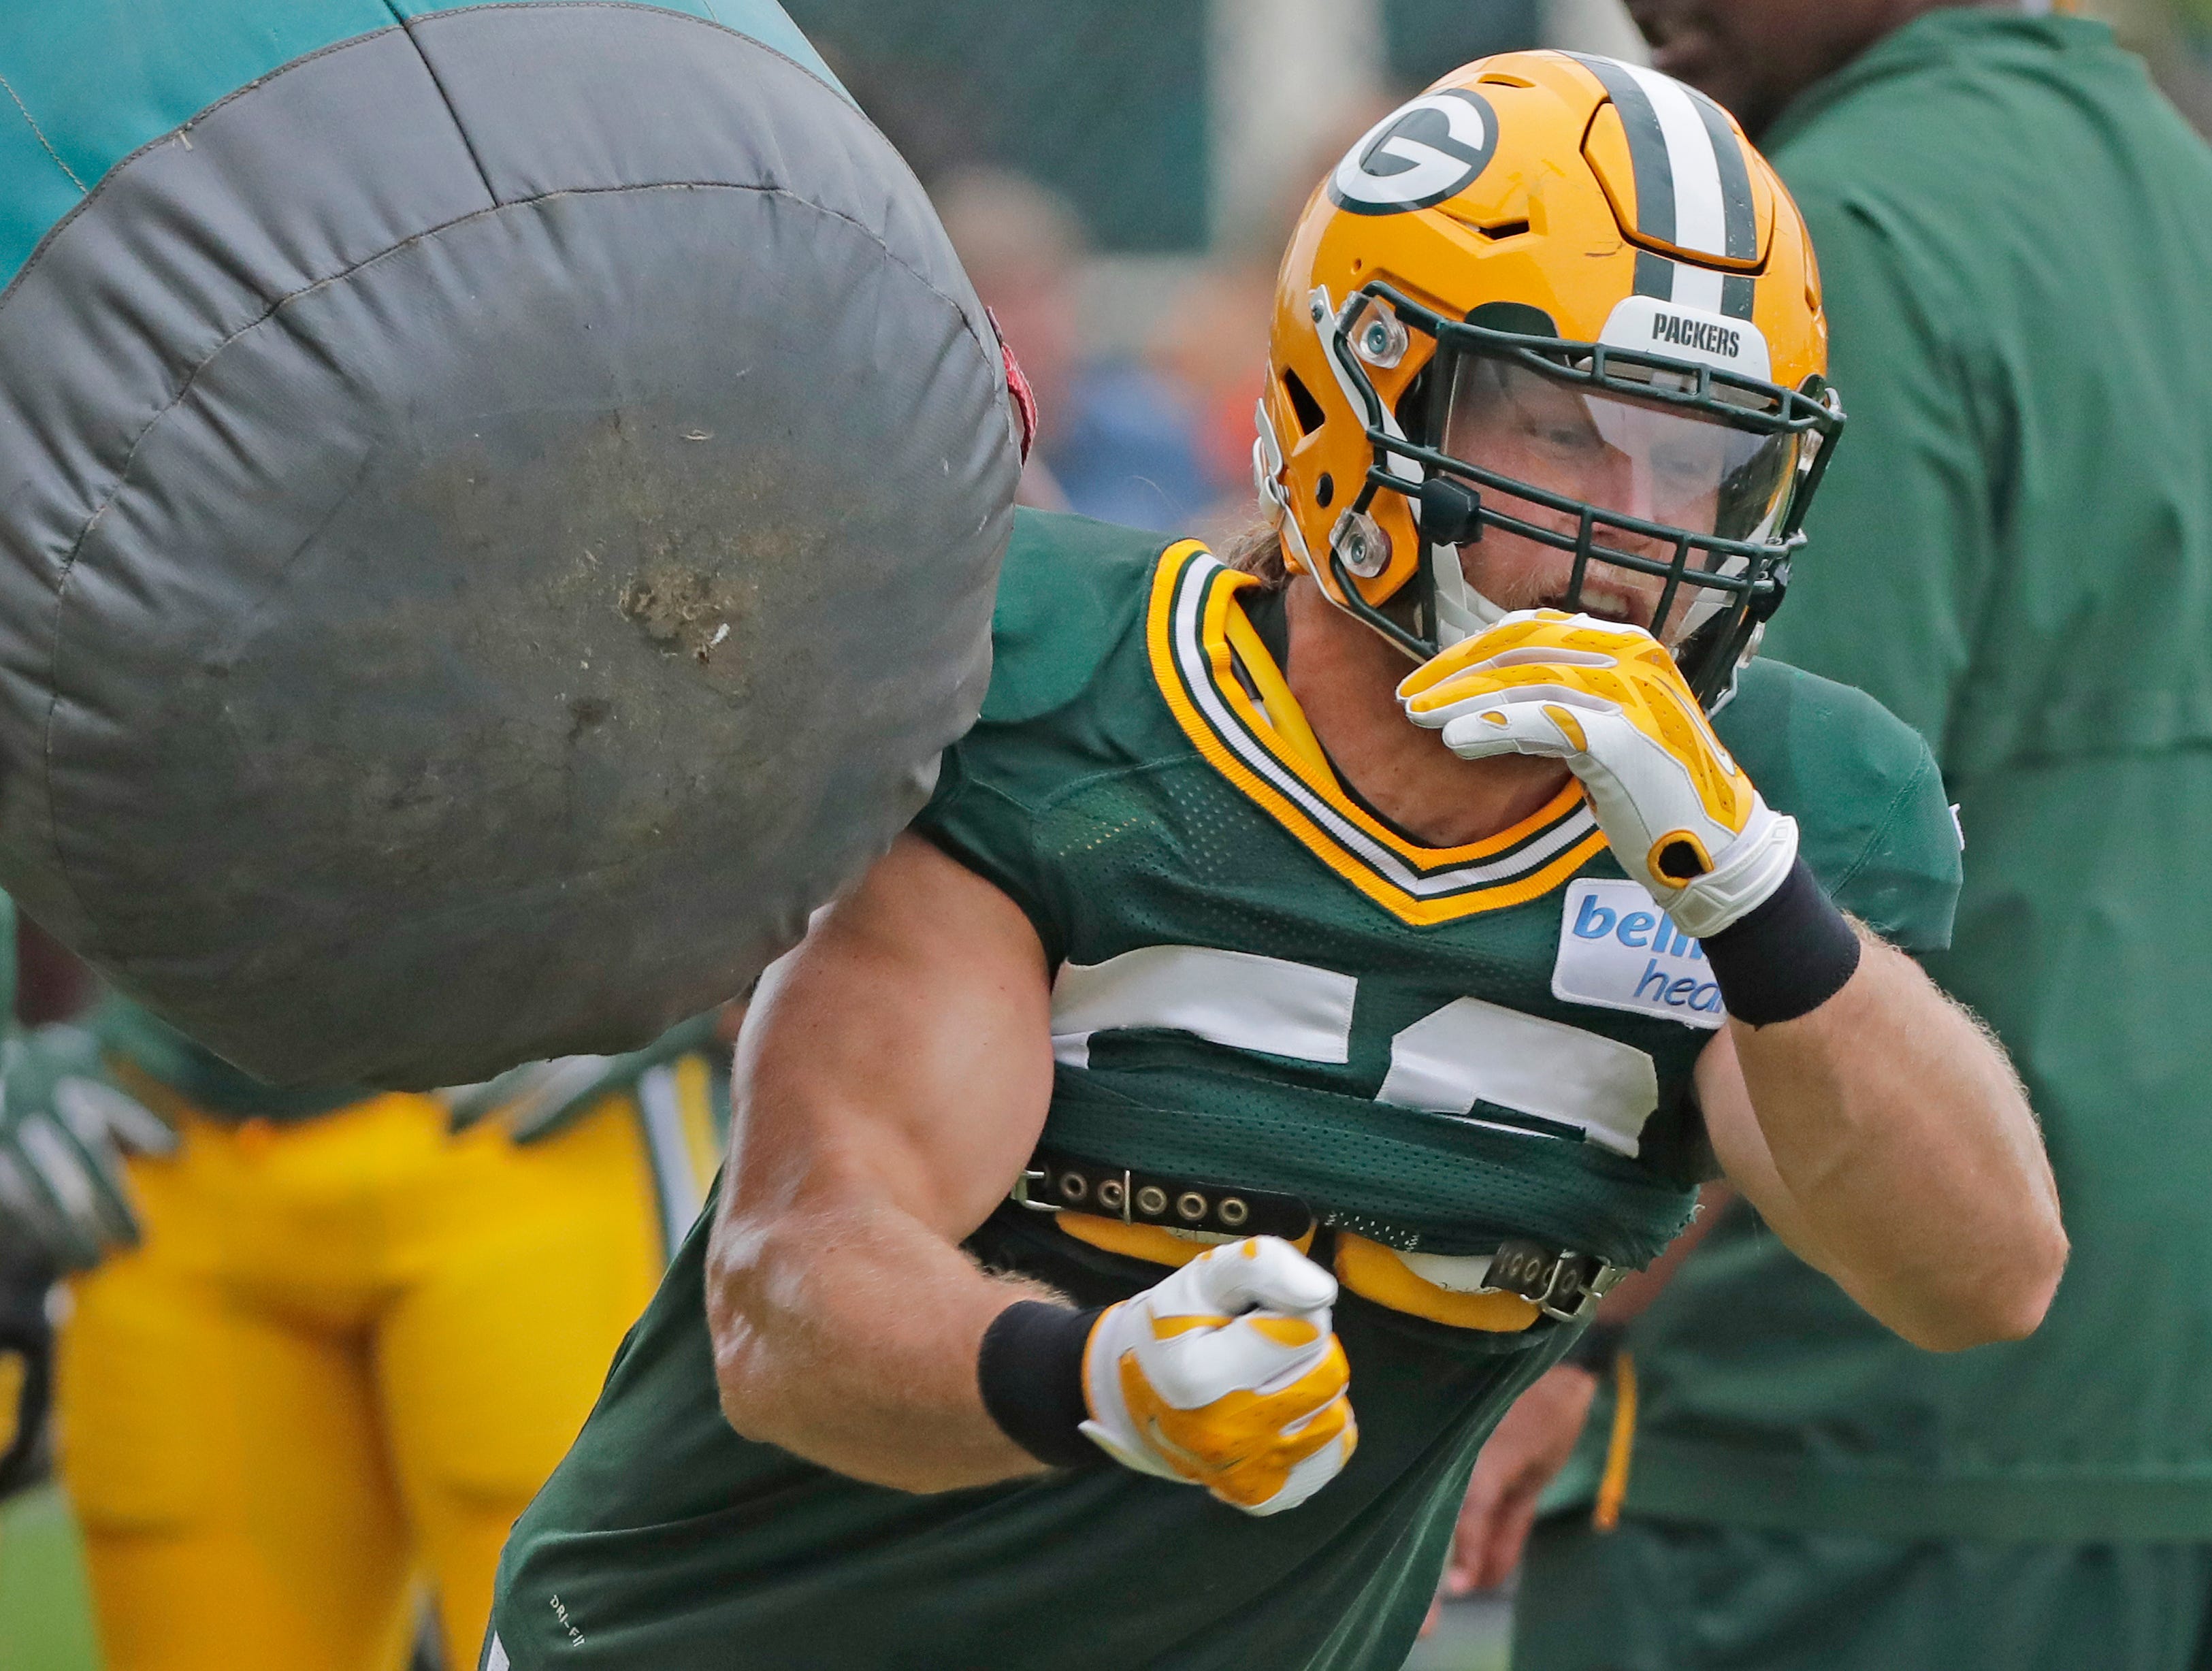 Green Bay Packers linebacker Clay Matthews (52) runs through a drill during training camp practice at Ray Nitschke Field on Monday, August 20, 2018 in Ashwaubenon, Wis.